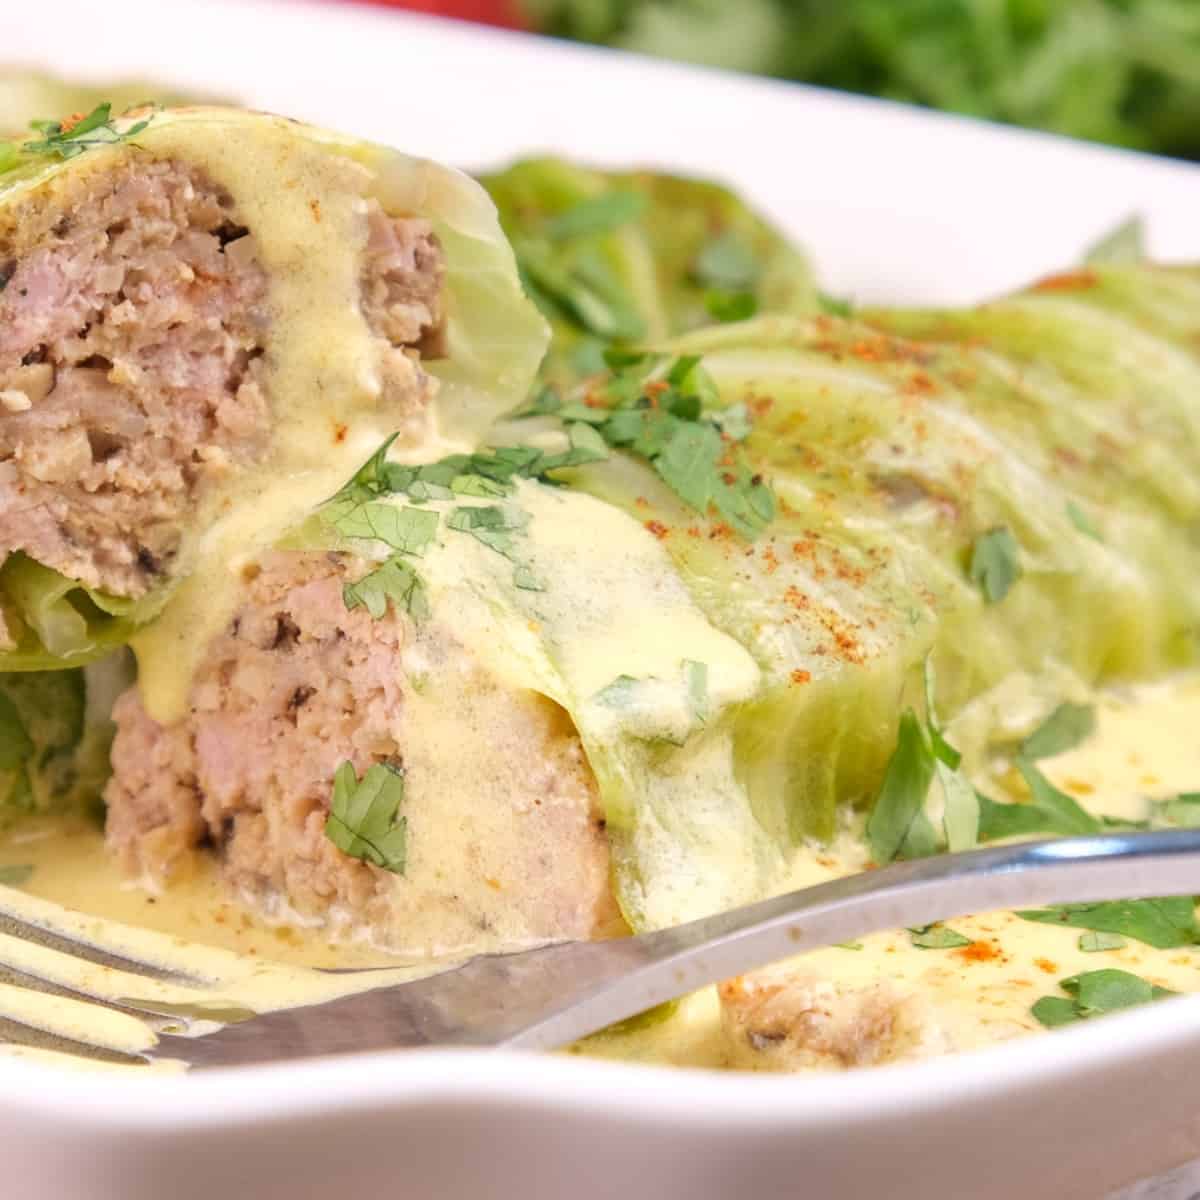 A close-up of sliced keto cabbage rolls, showing the pork filling inside.